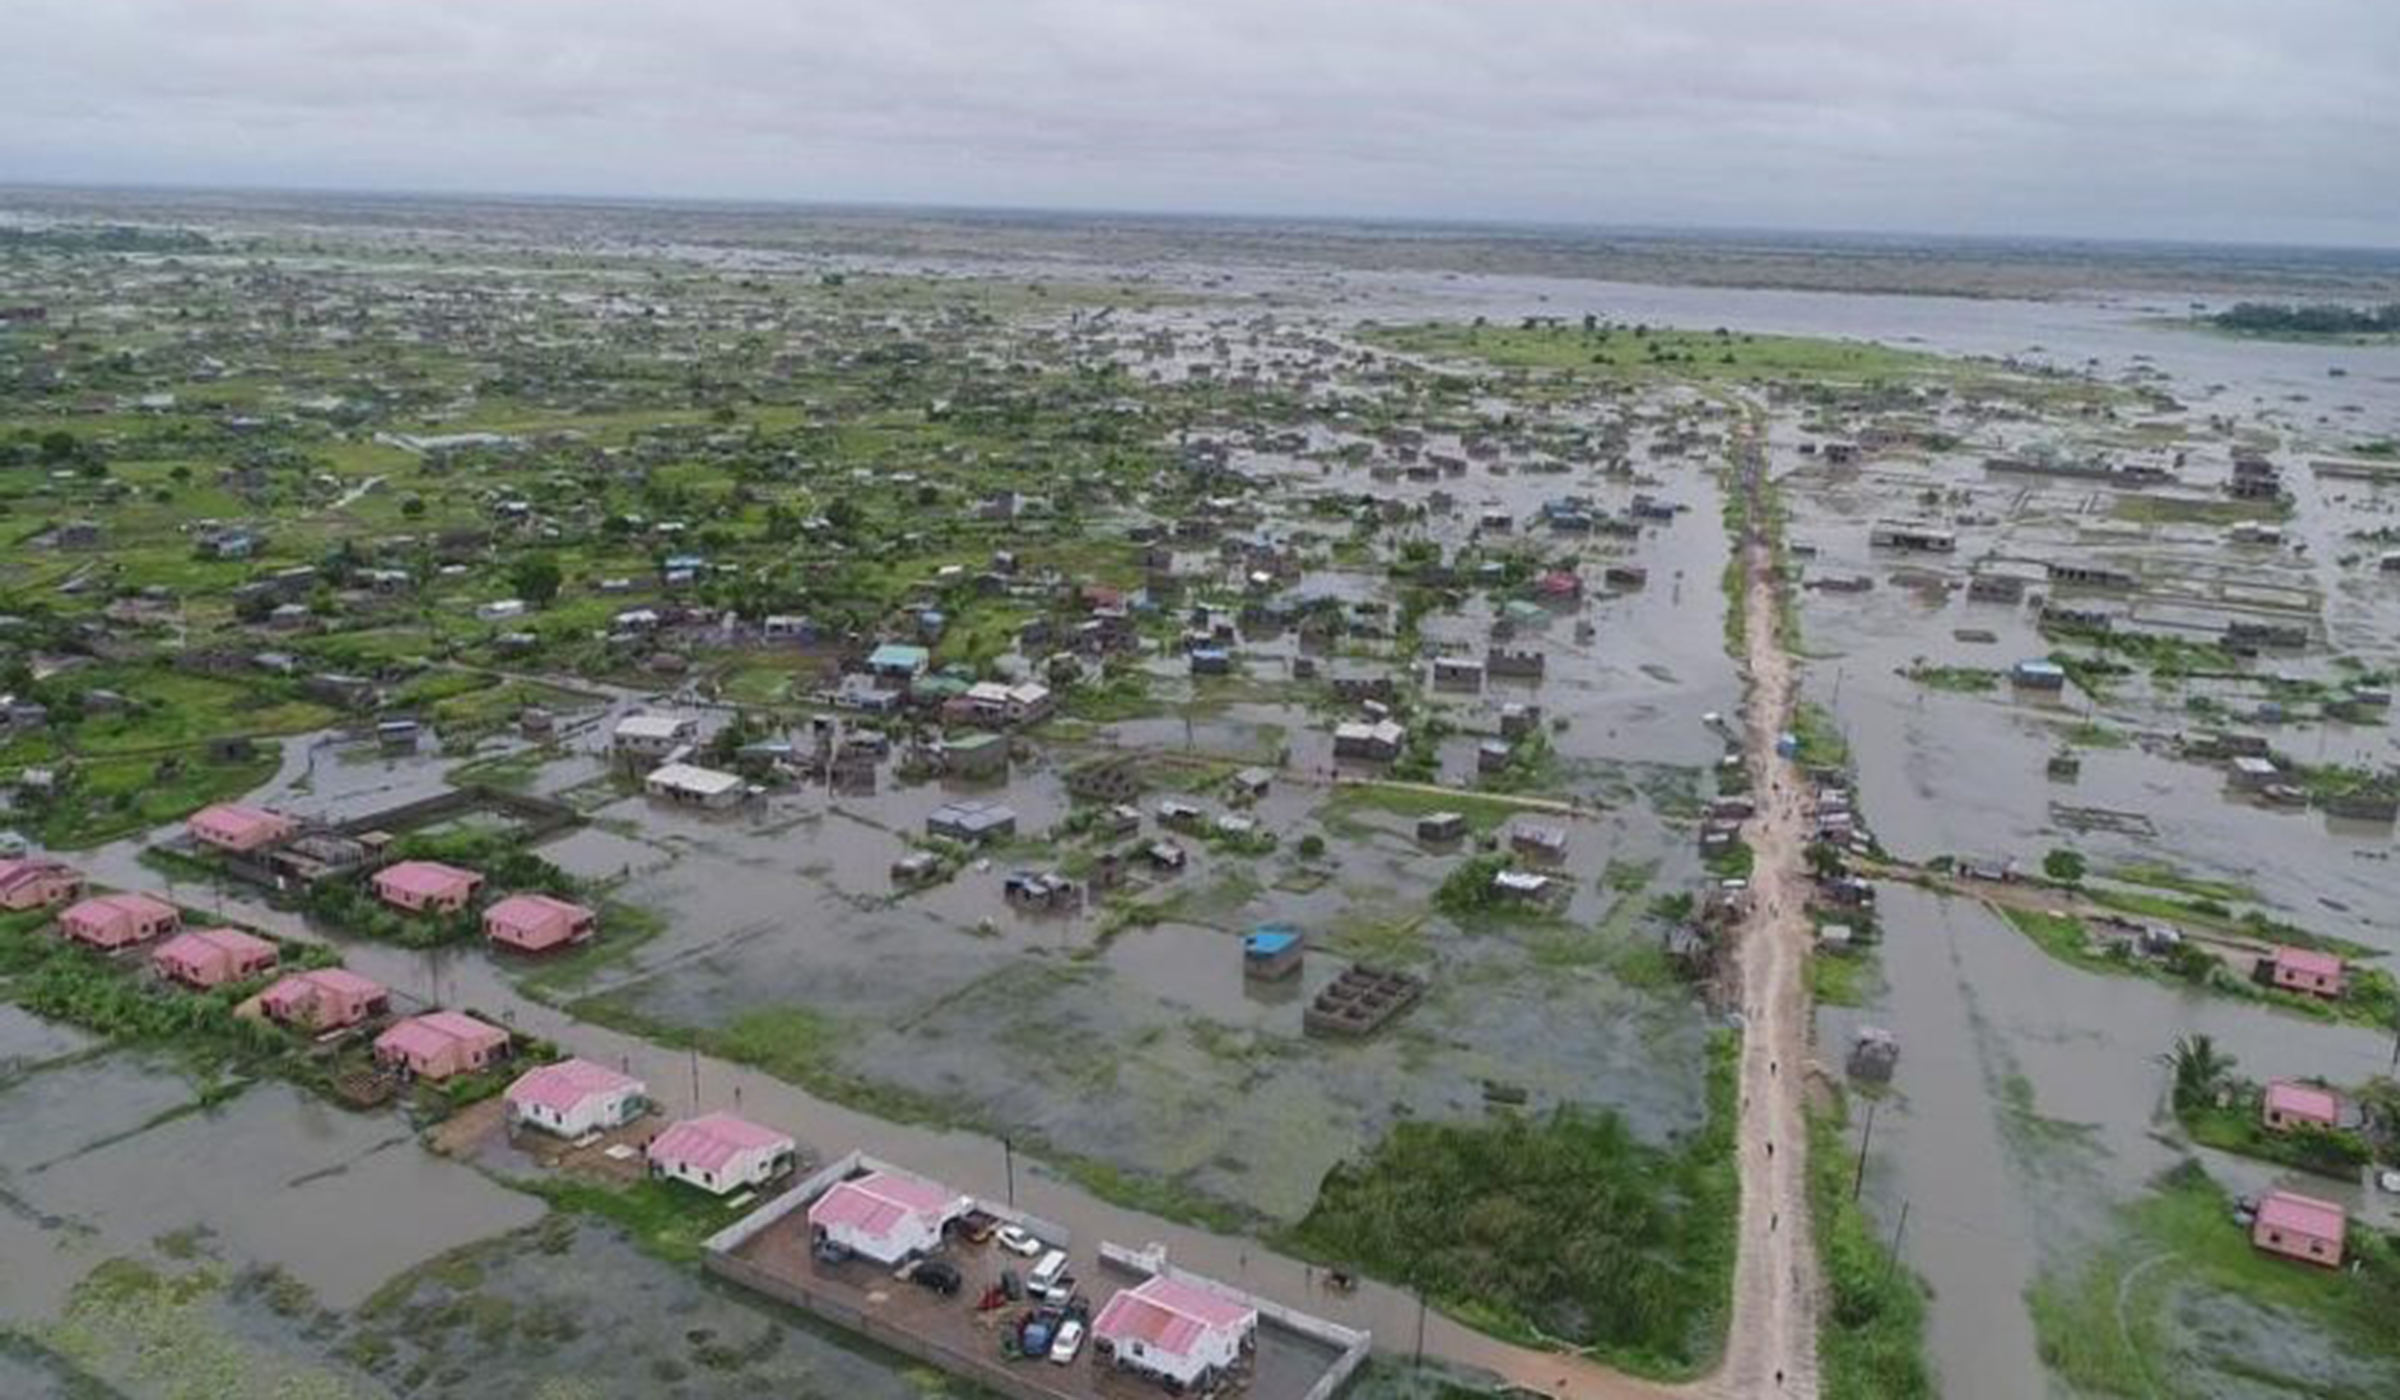 Death toll from Tropical Cyclone Idai could exceed 1,000. (Net photo)